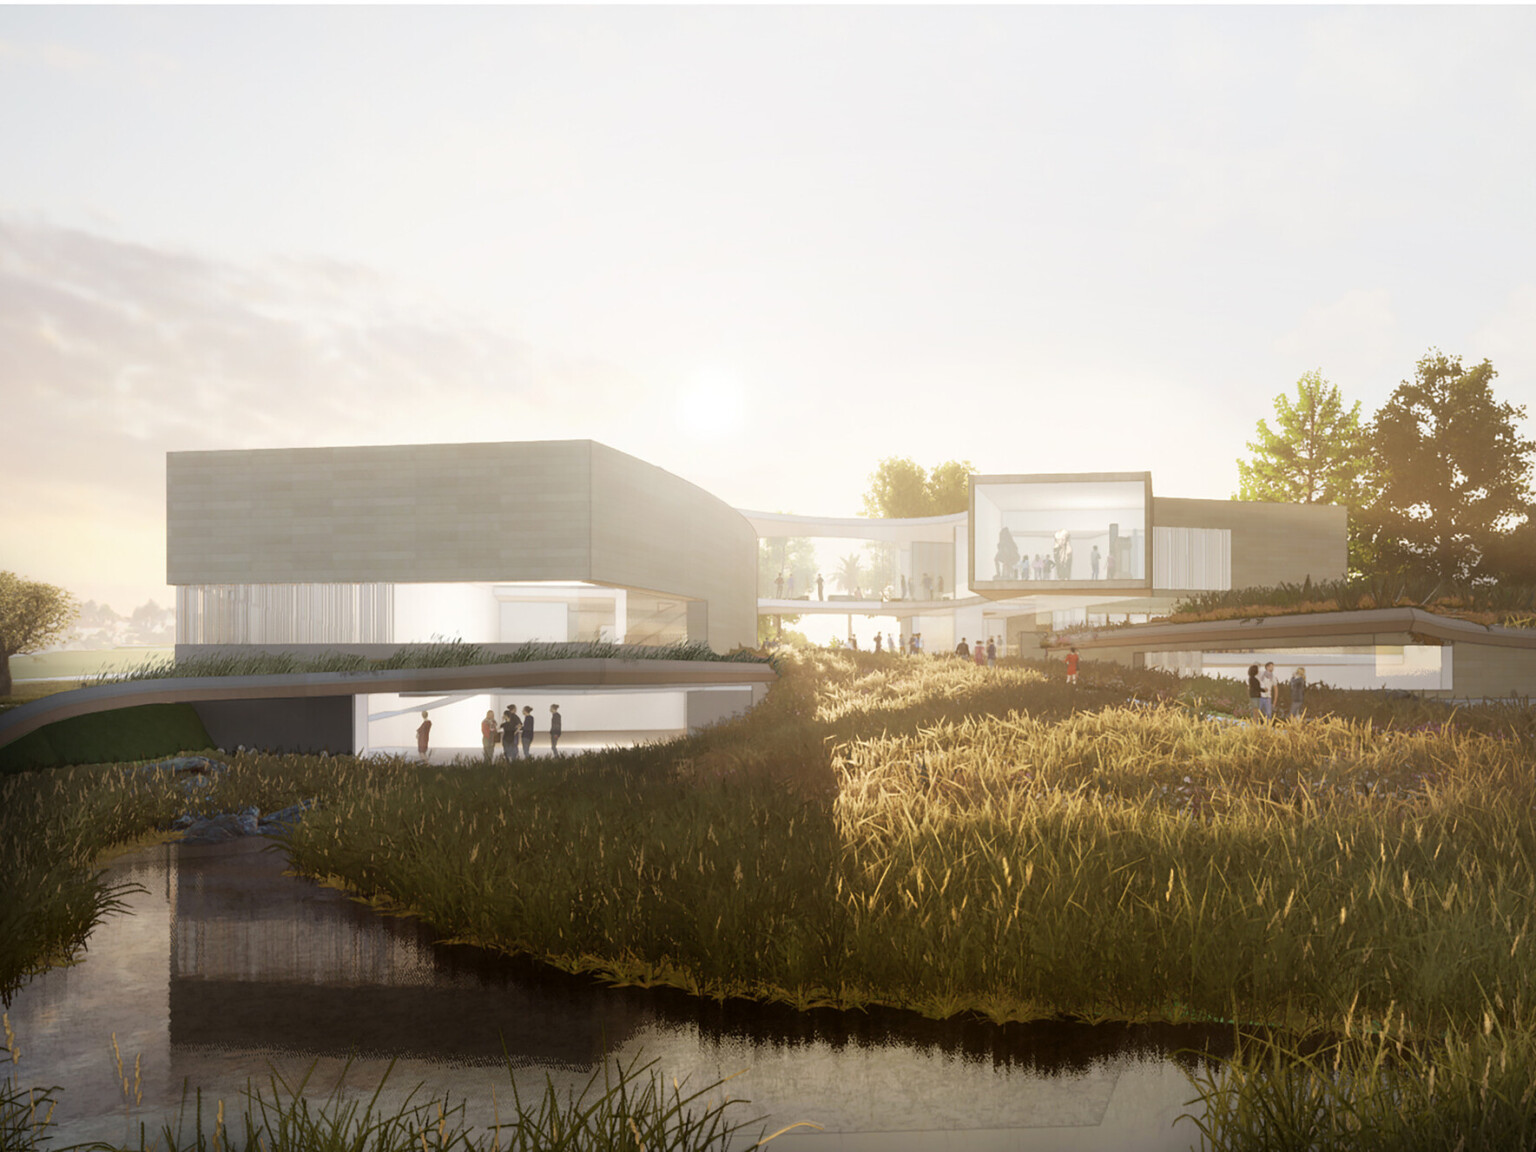 Rendering of a modern museum building surrounded by greenery bustling with people